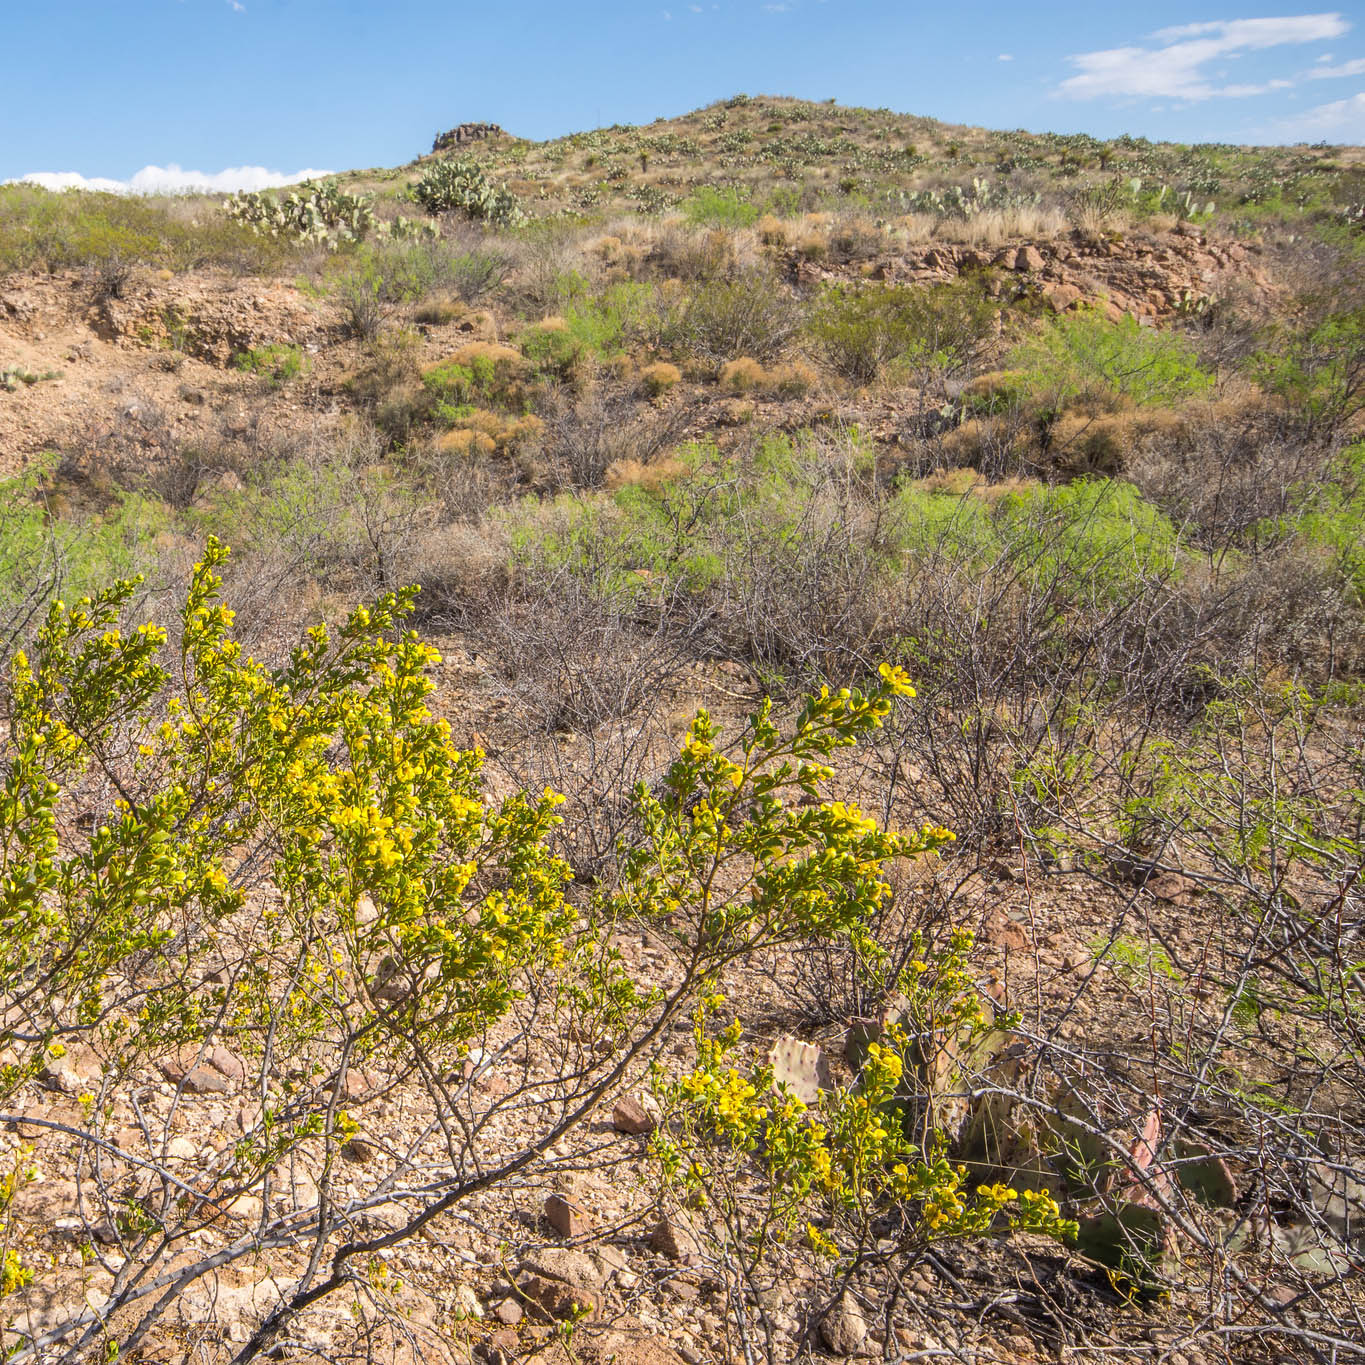 Thick green and yellow brush adorns rocky outcrops.